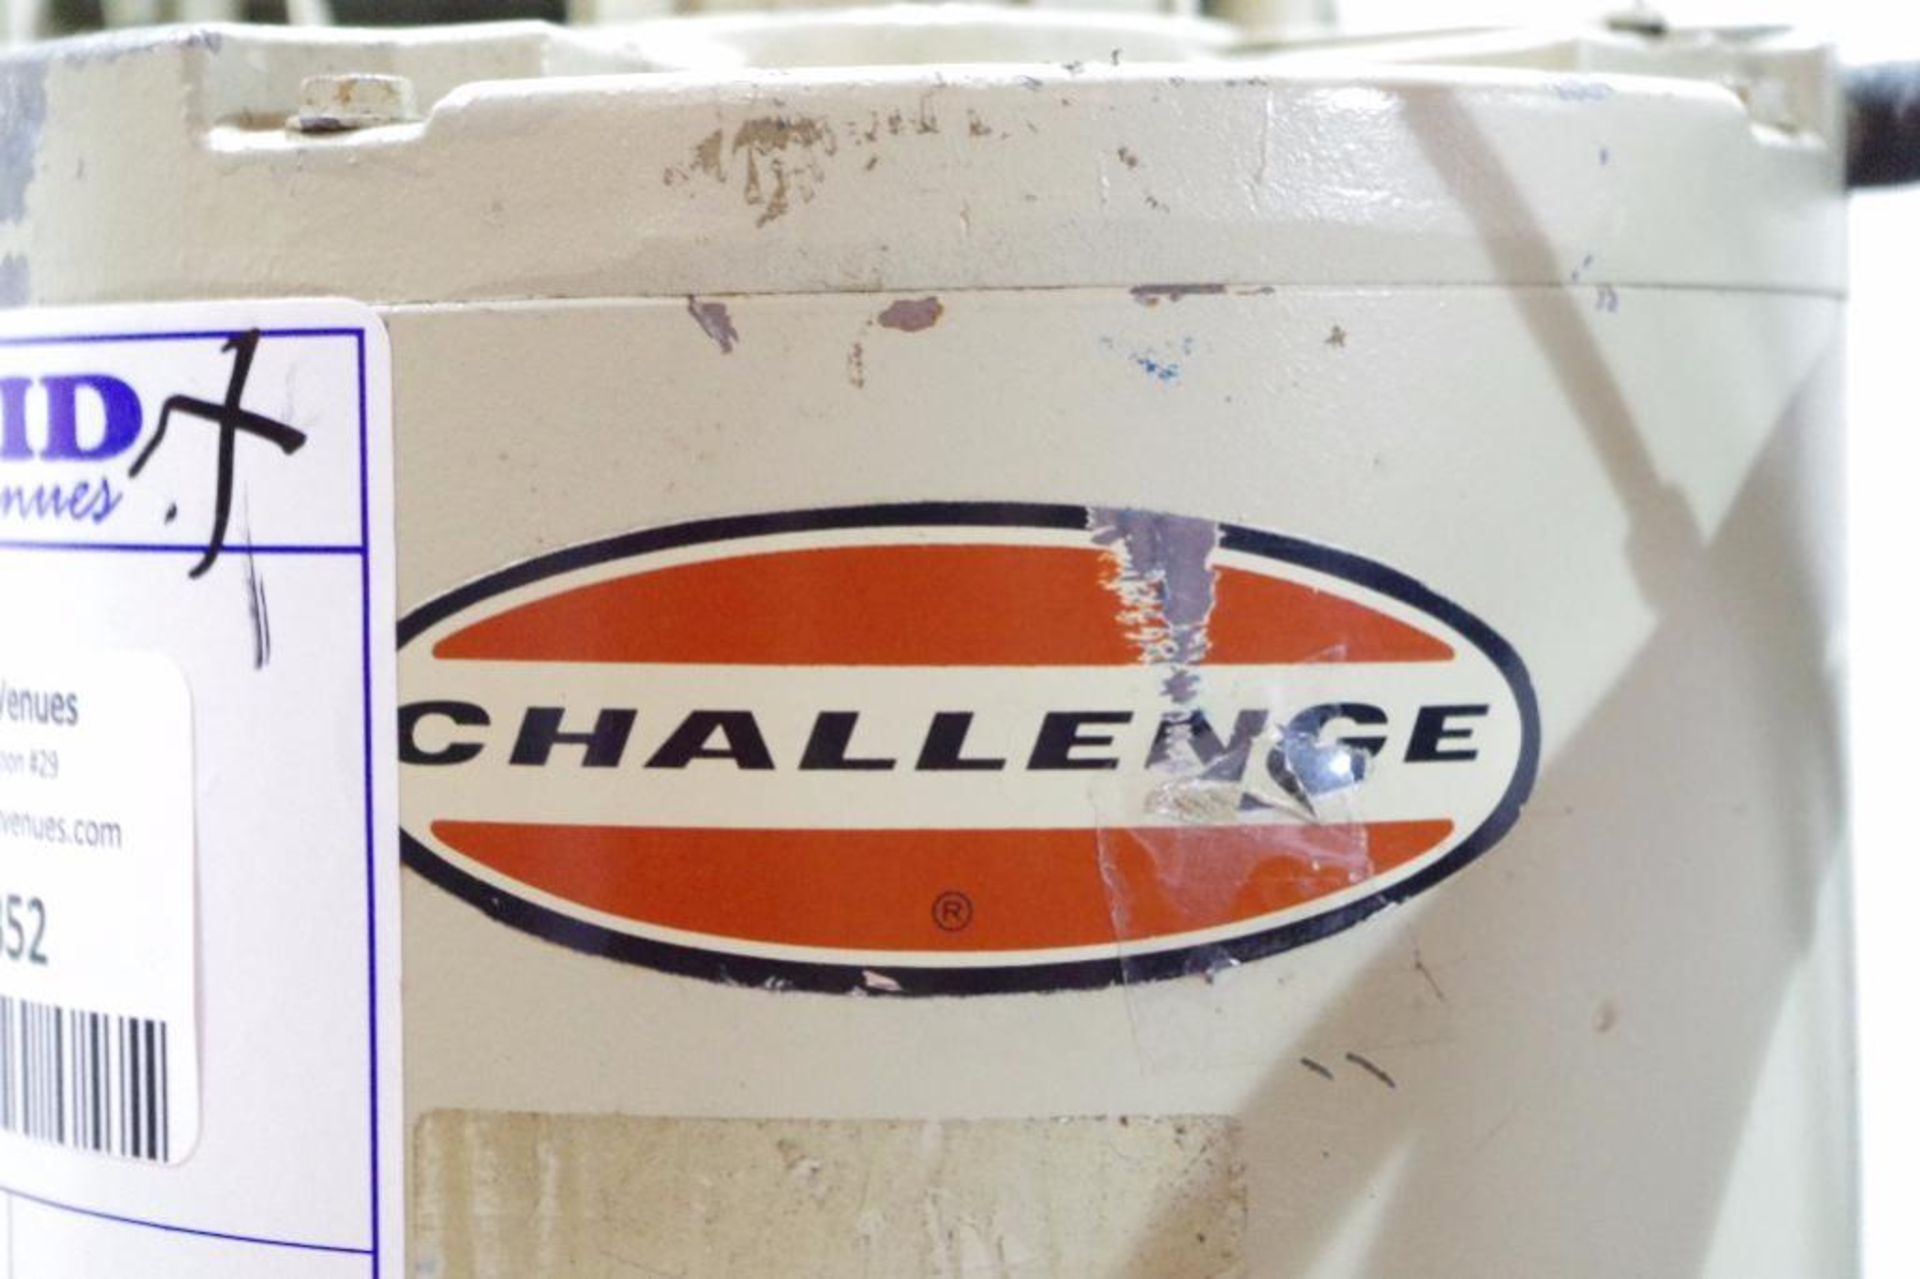 CHALLENGE Paper Drill 115V, 5.4A, PH1, M/N JO, Made in USA - Image 4 of 6